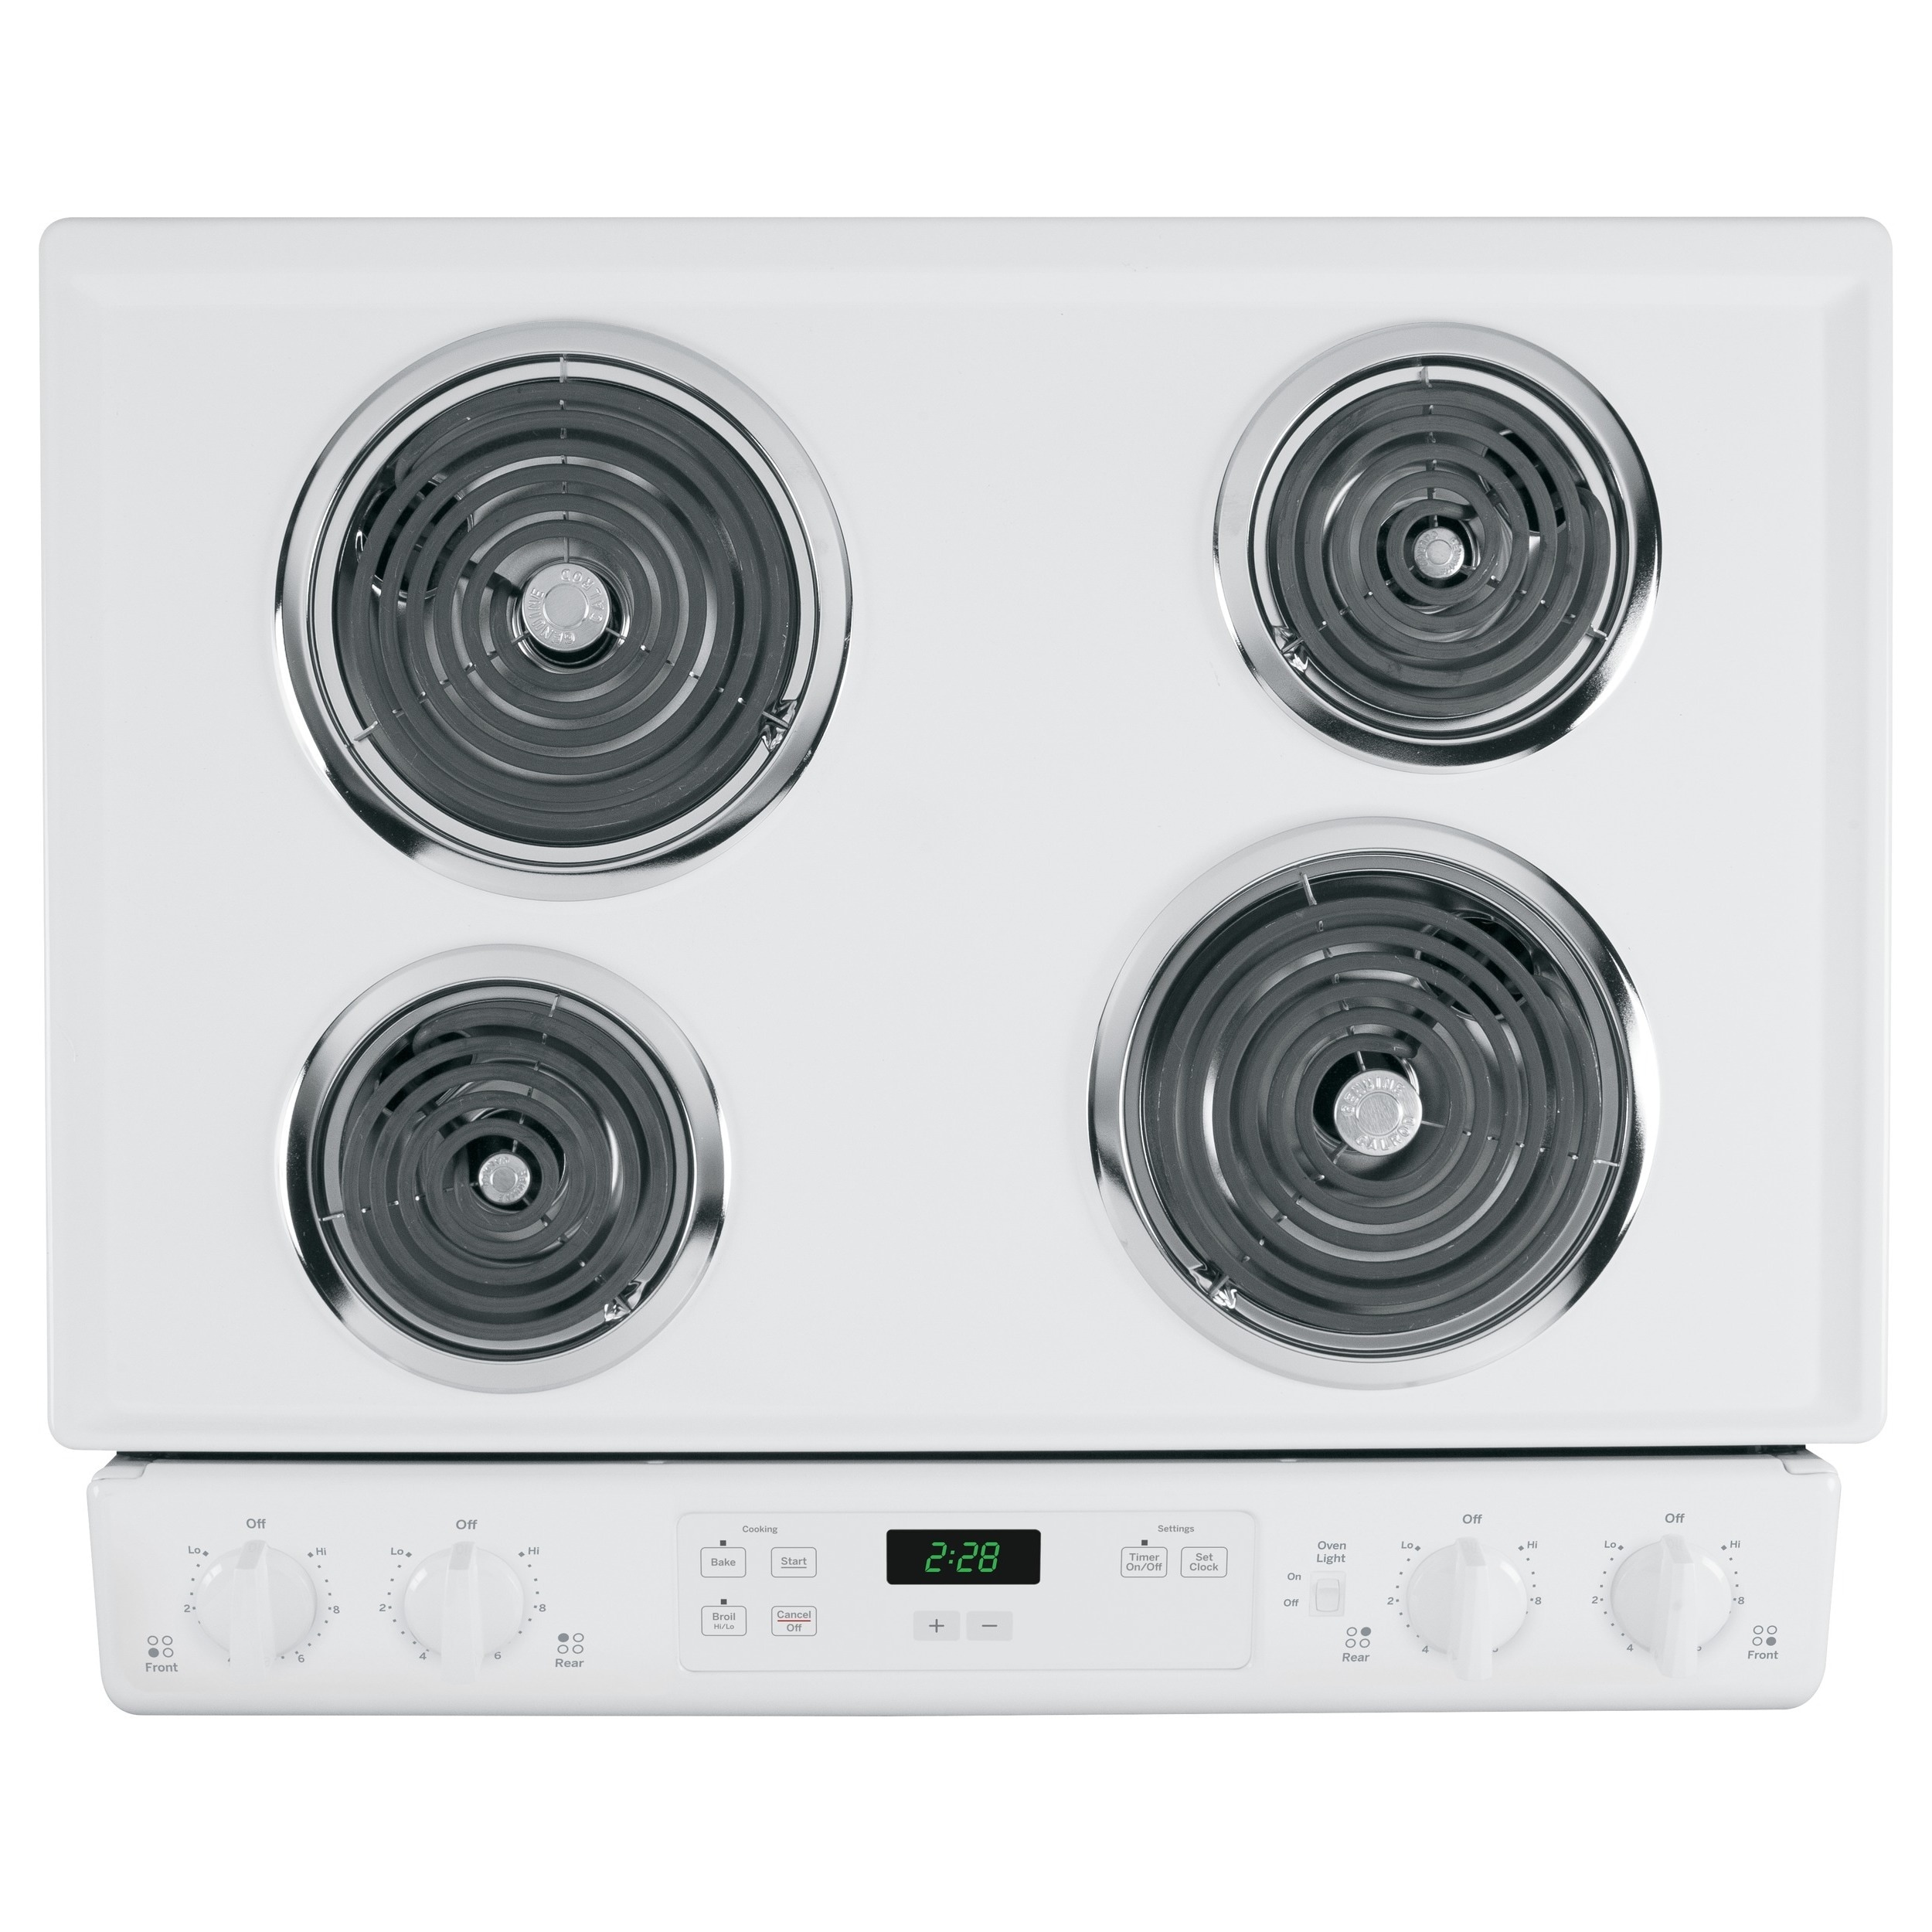 GE JDS26BWWH 30 Inch Drop-In Electric Range with Standard Clean: White